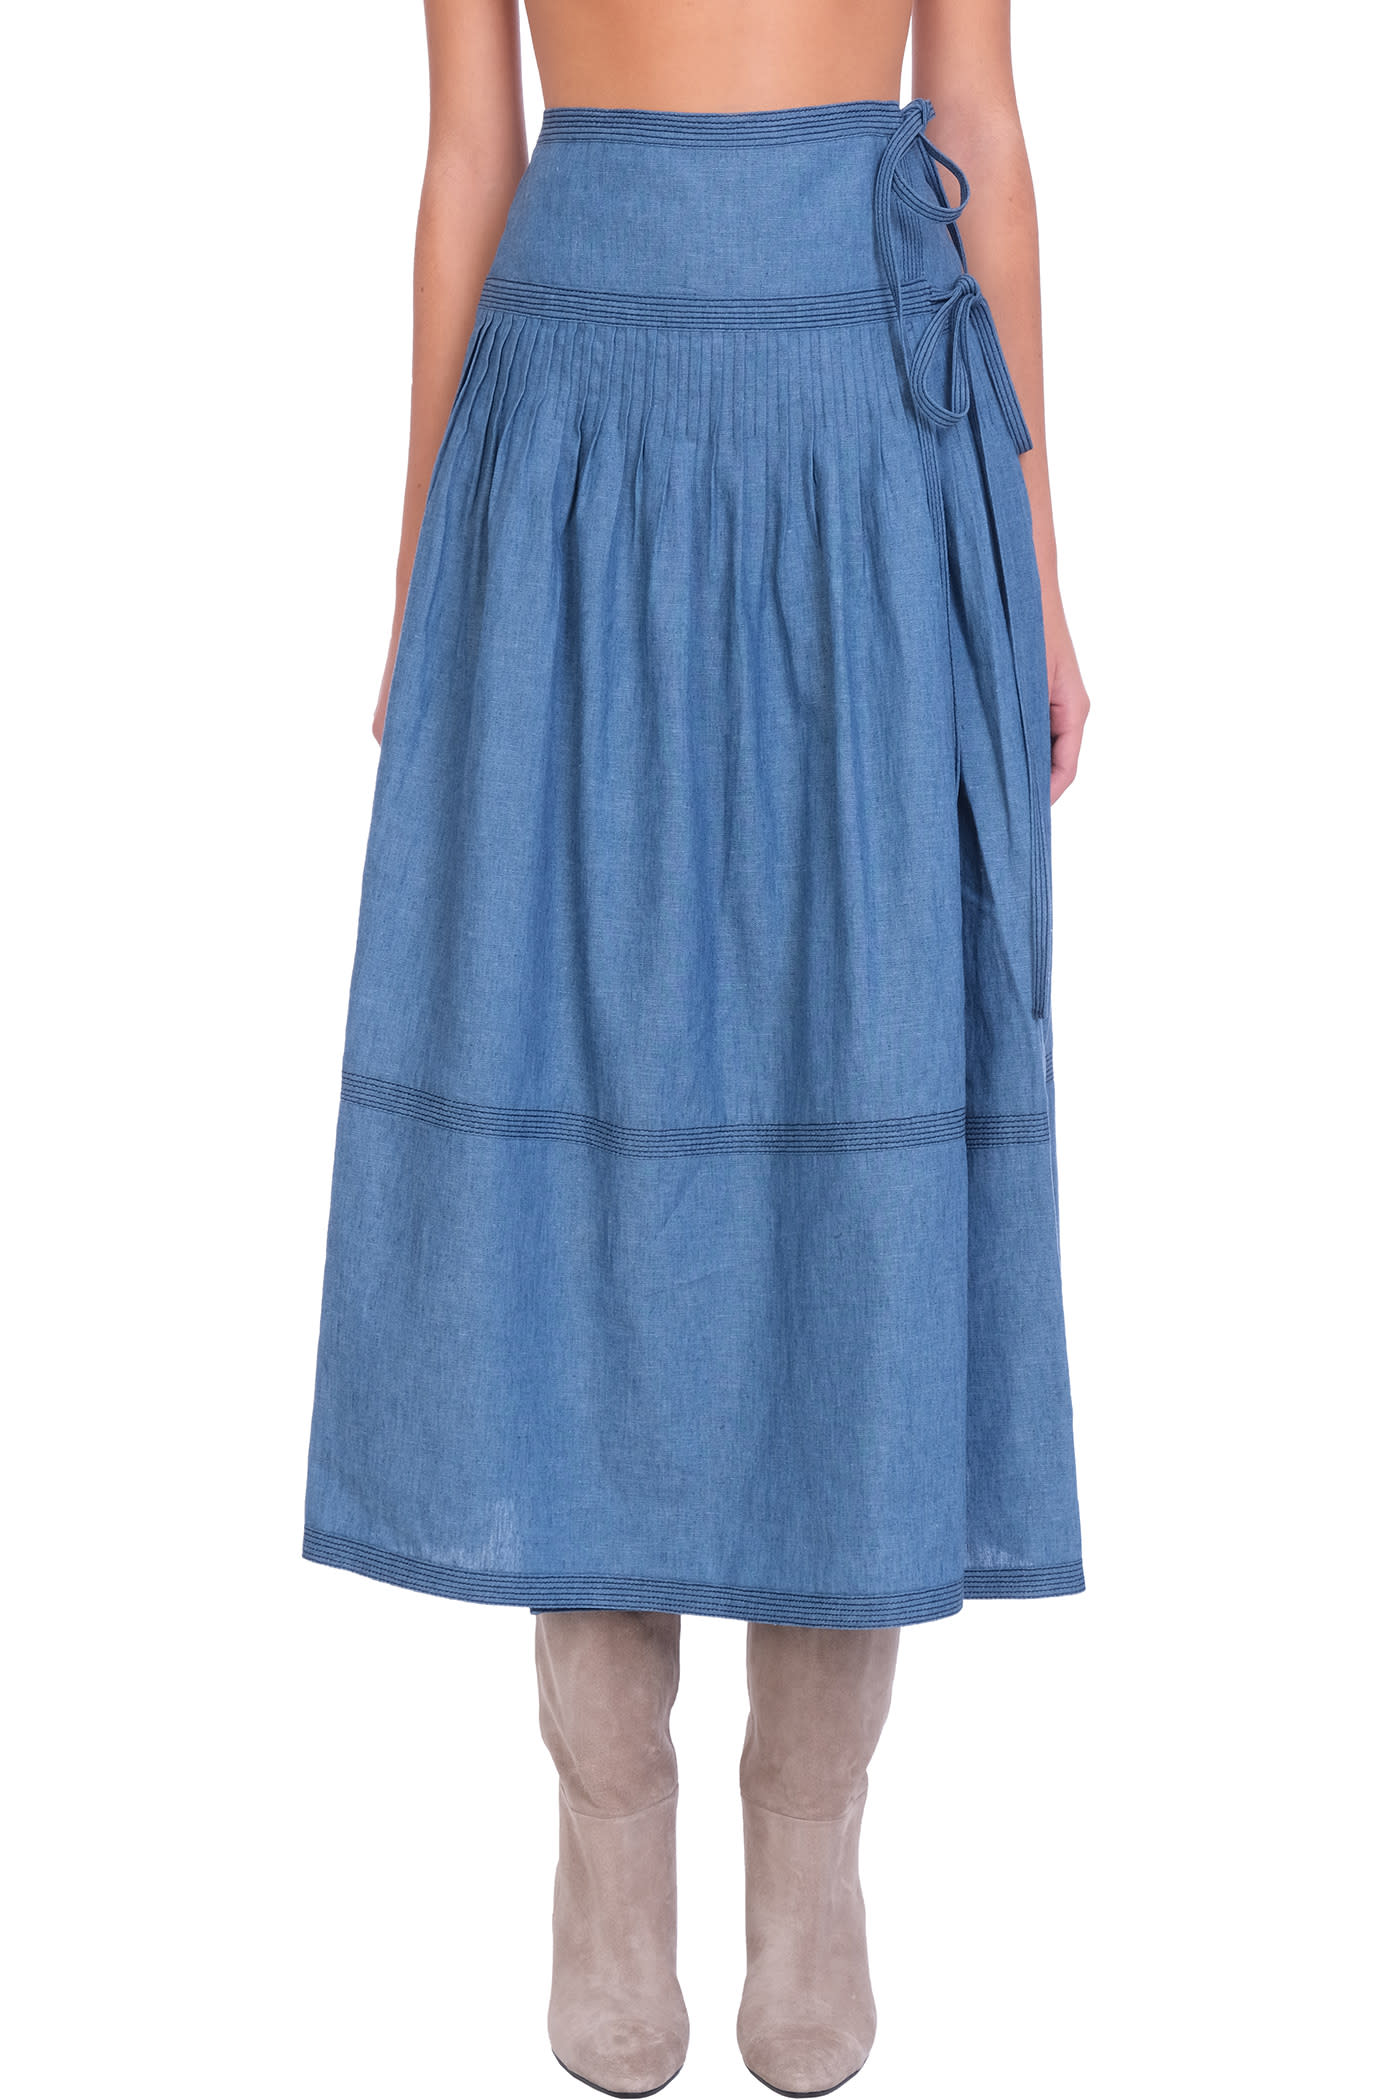 Tory Burch Skirt In Blue Cotton